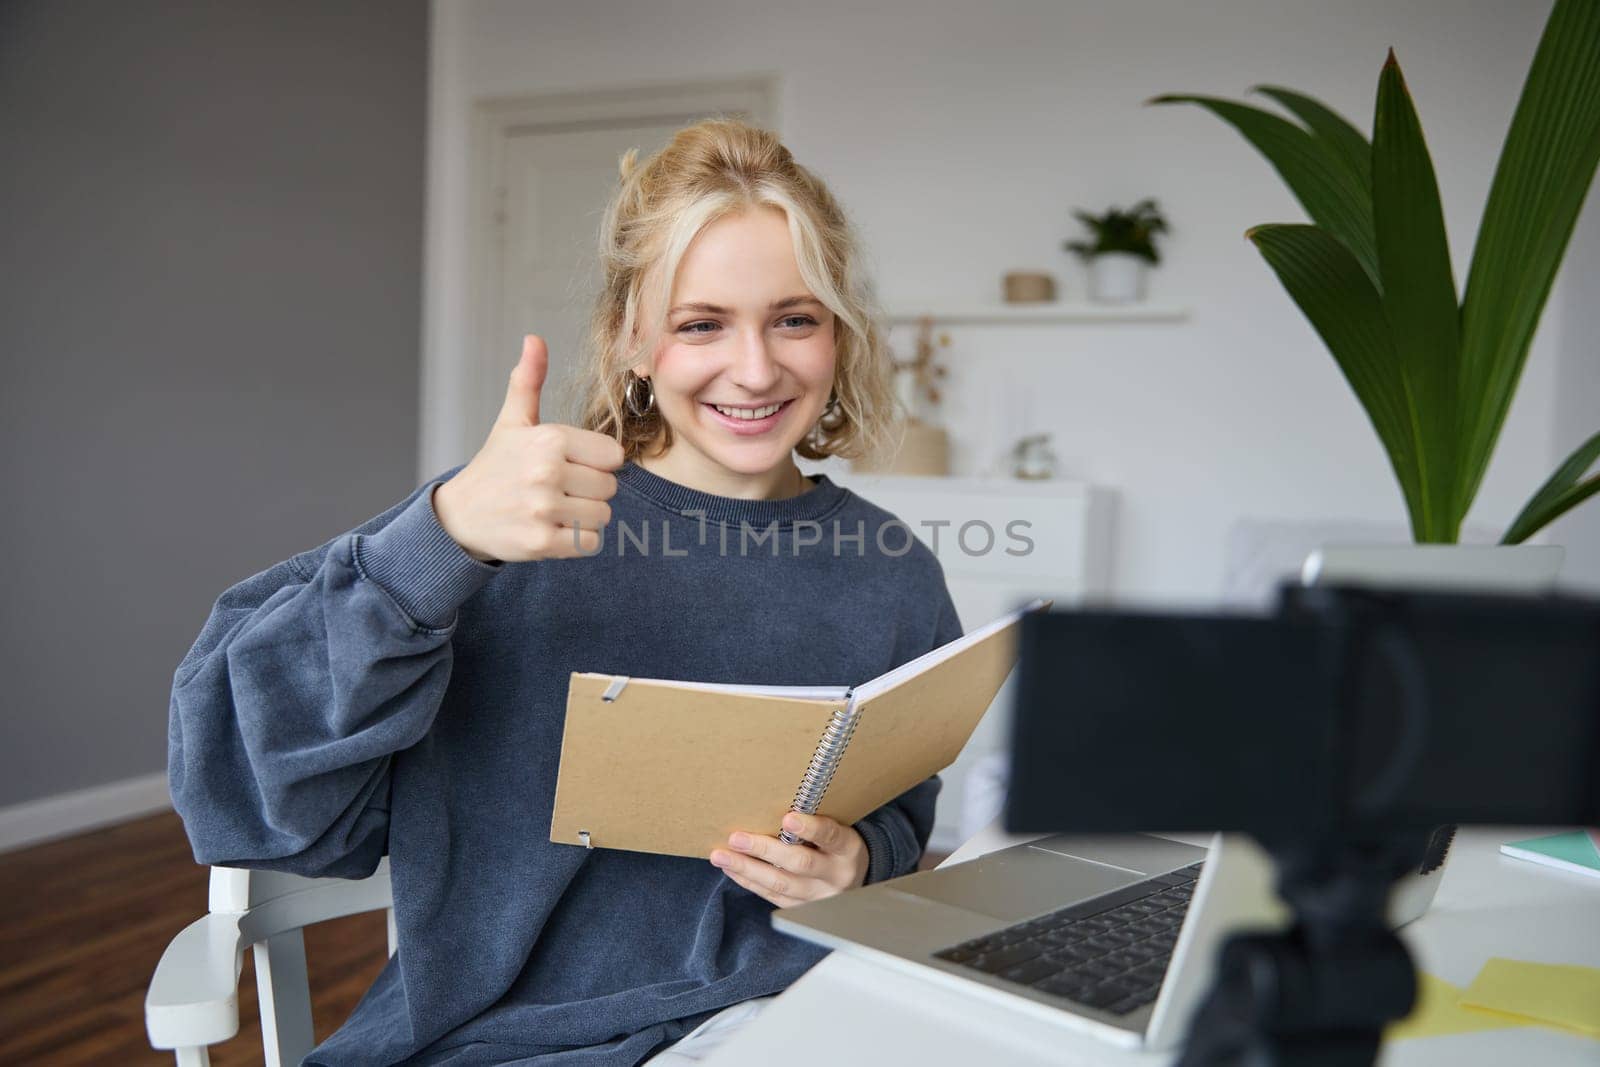 Portrait of smiling blond woman, social media vlogger, reads notes from notebook and looks at digital camera, records video in her room, shows thumbs up.